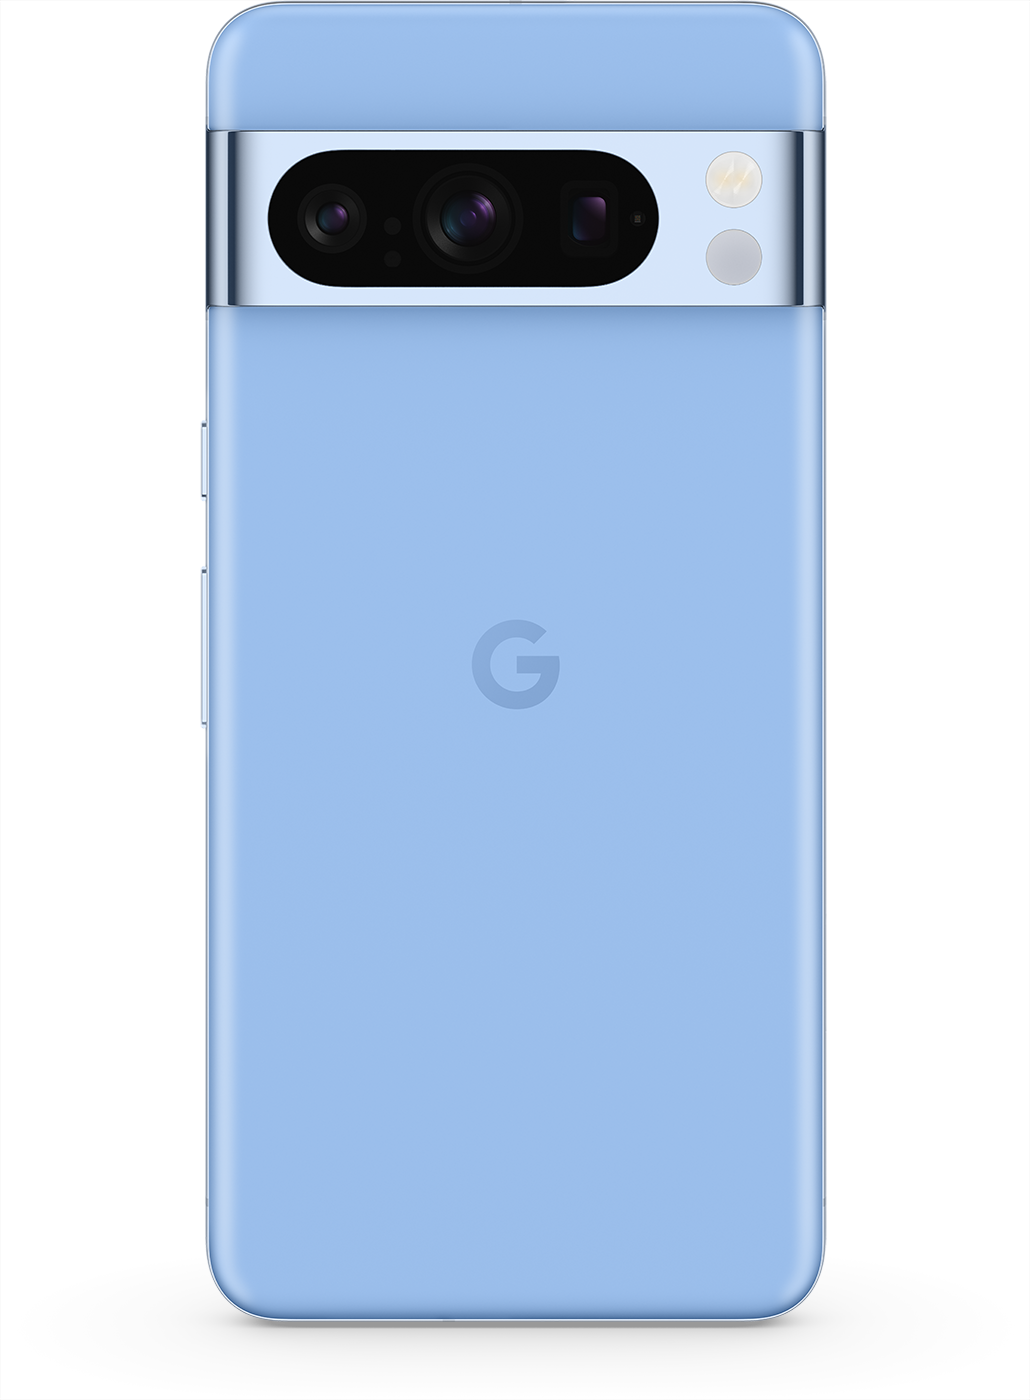 Pixel 8: The Tensor G3 Phone with AI - Google Store